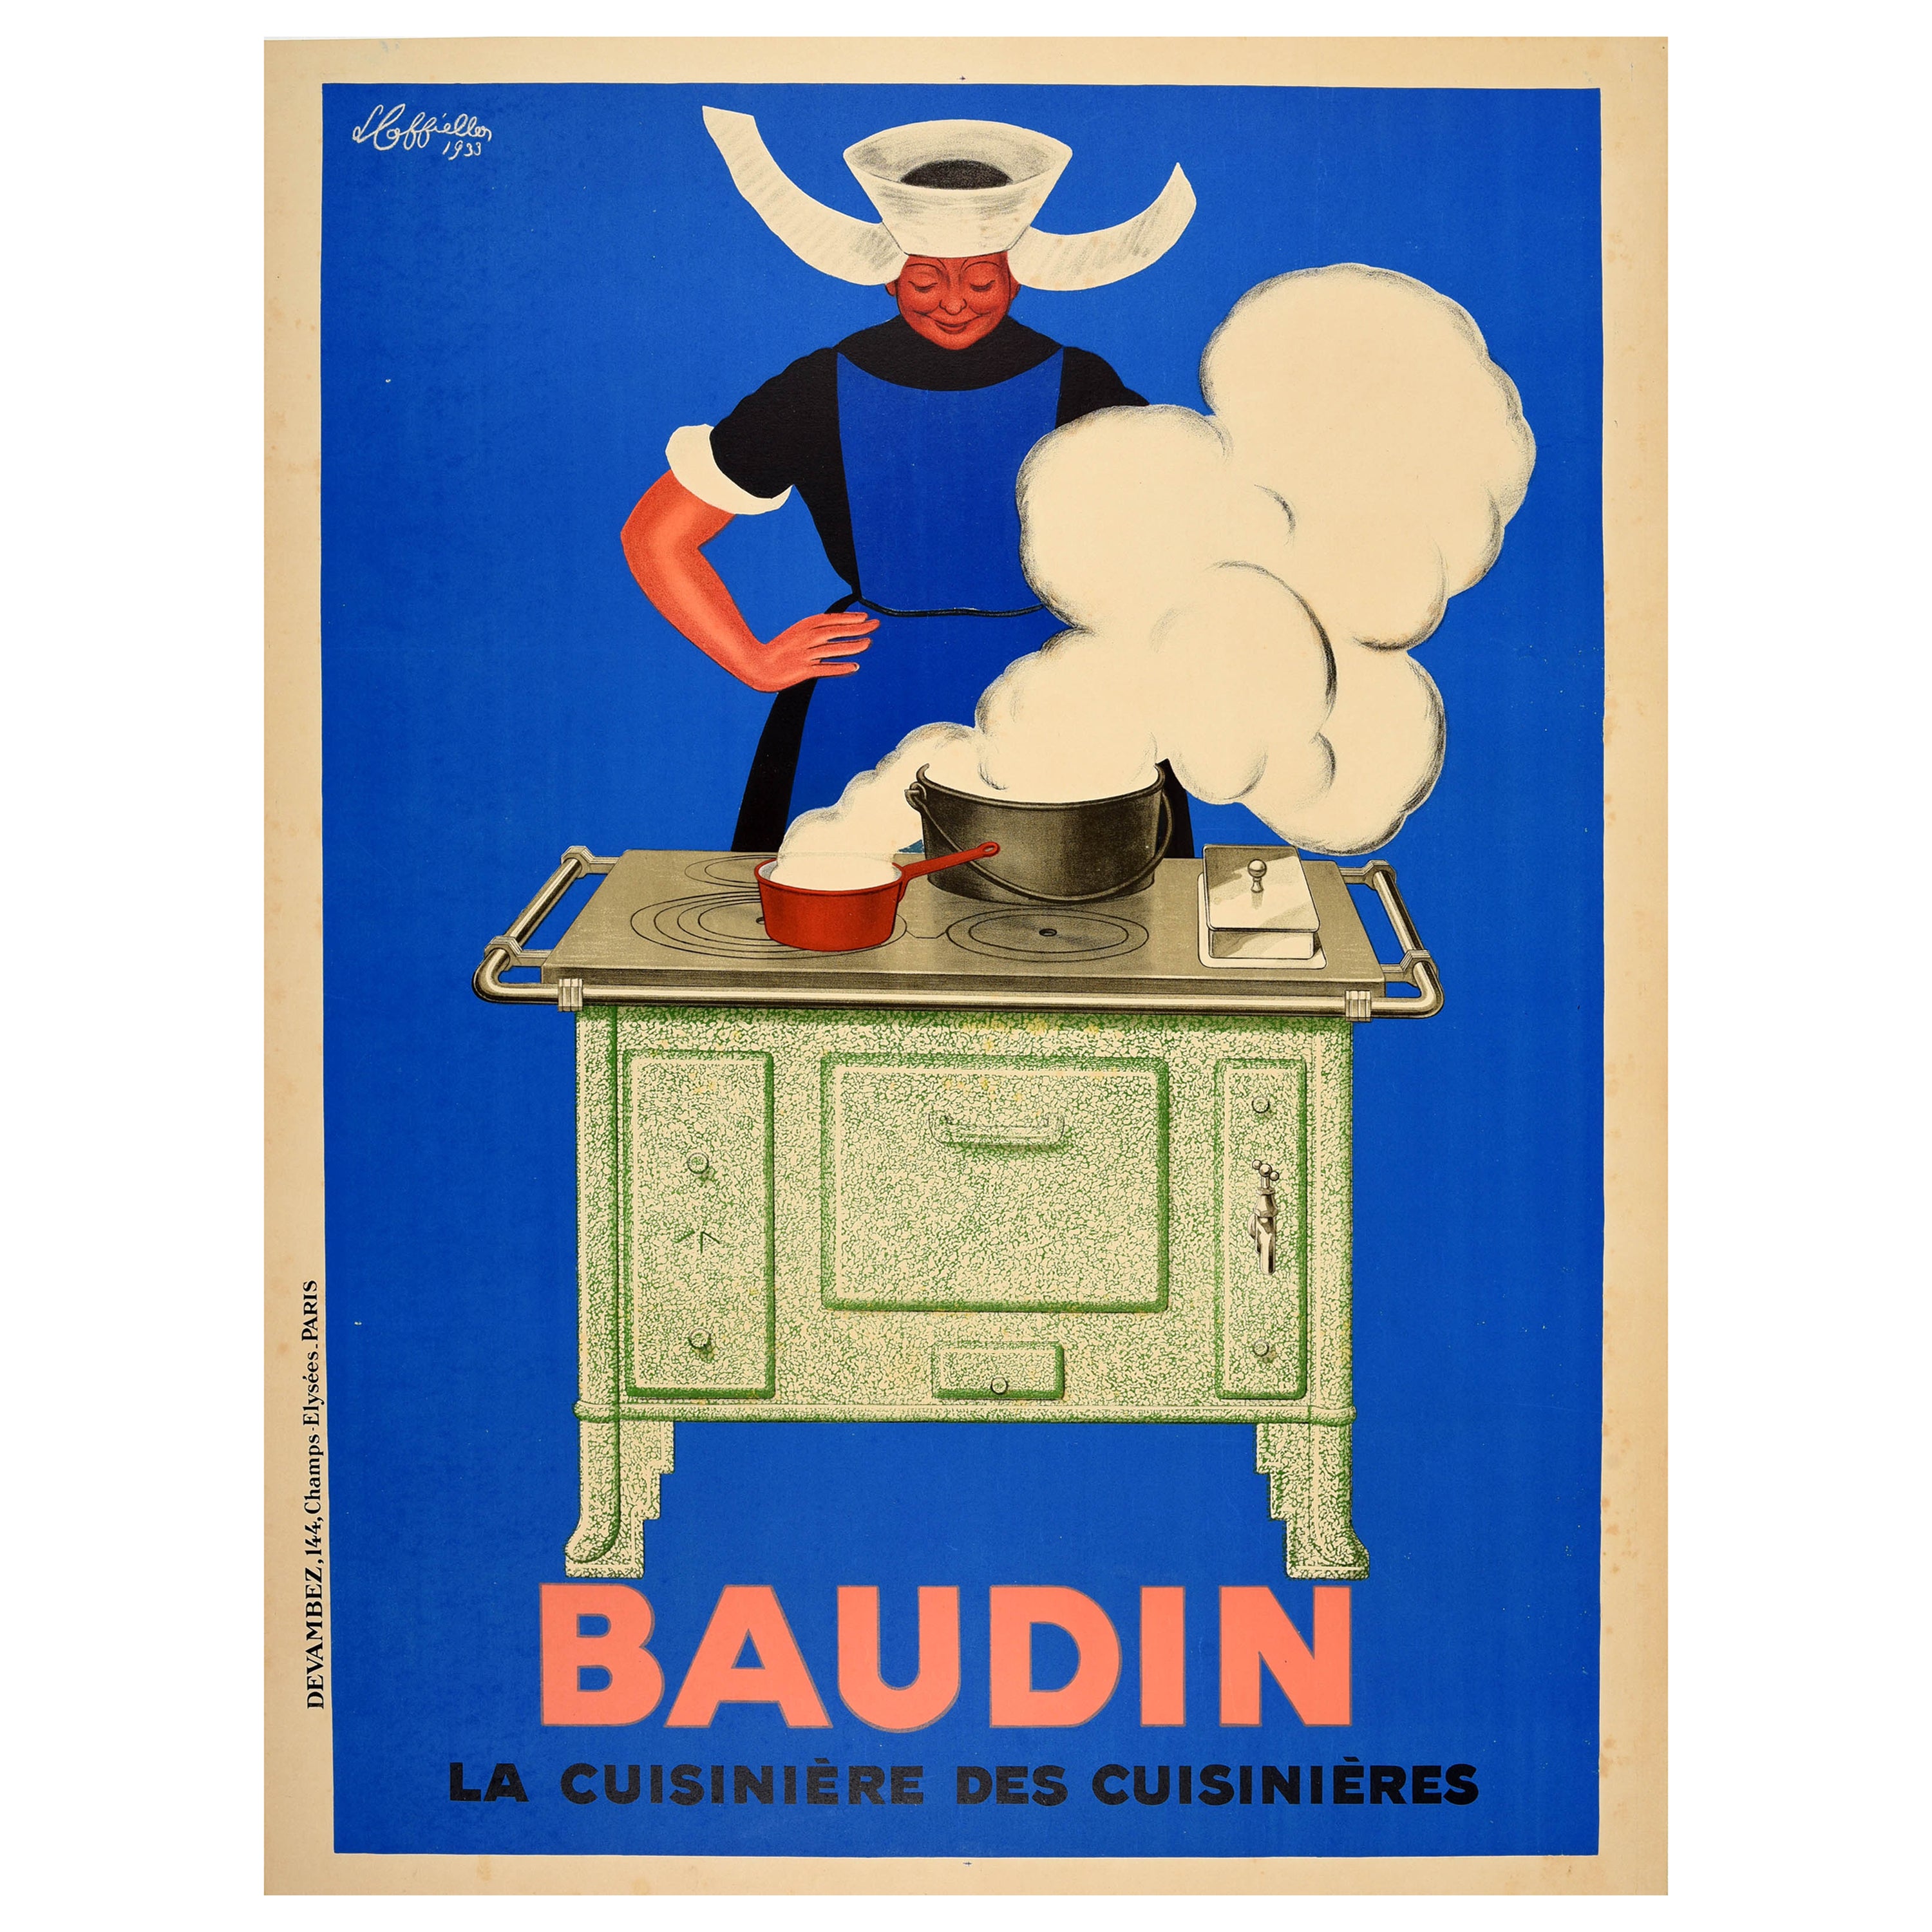 Original Vintage Advertising Poster Baudin Cuisiniere Cooking Leonetto Cappiello For Sale